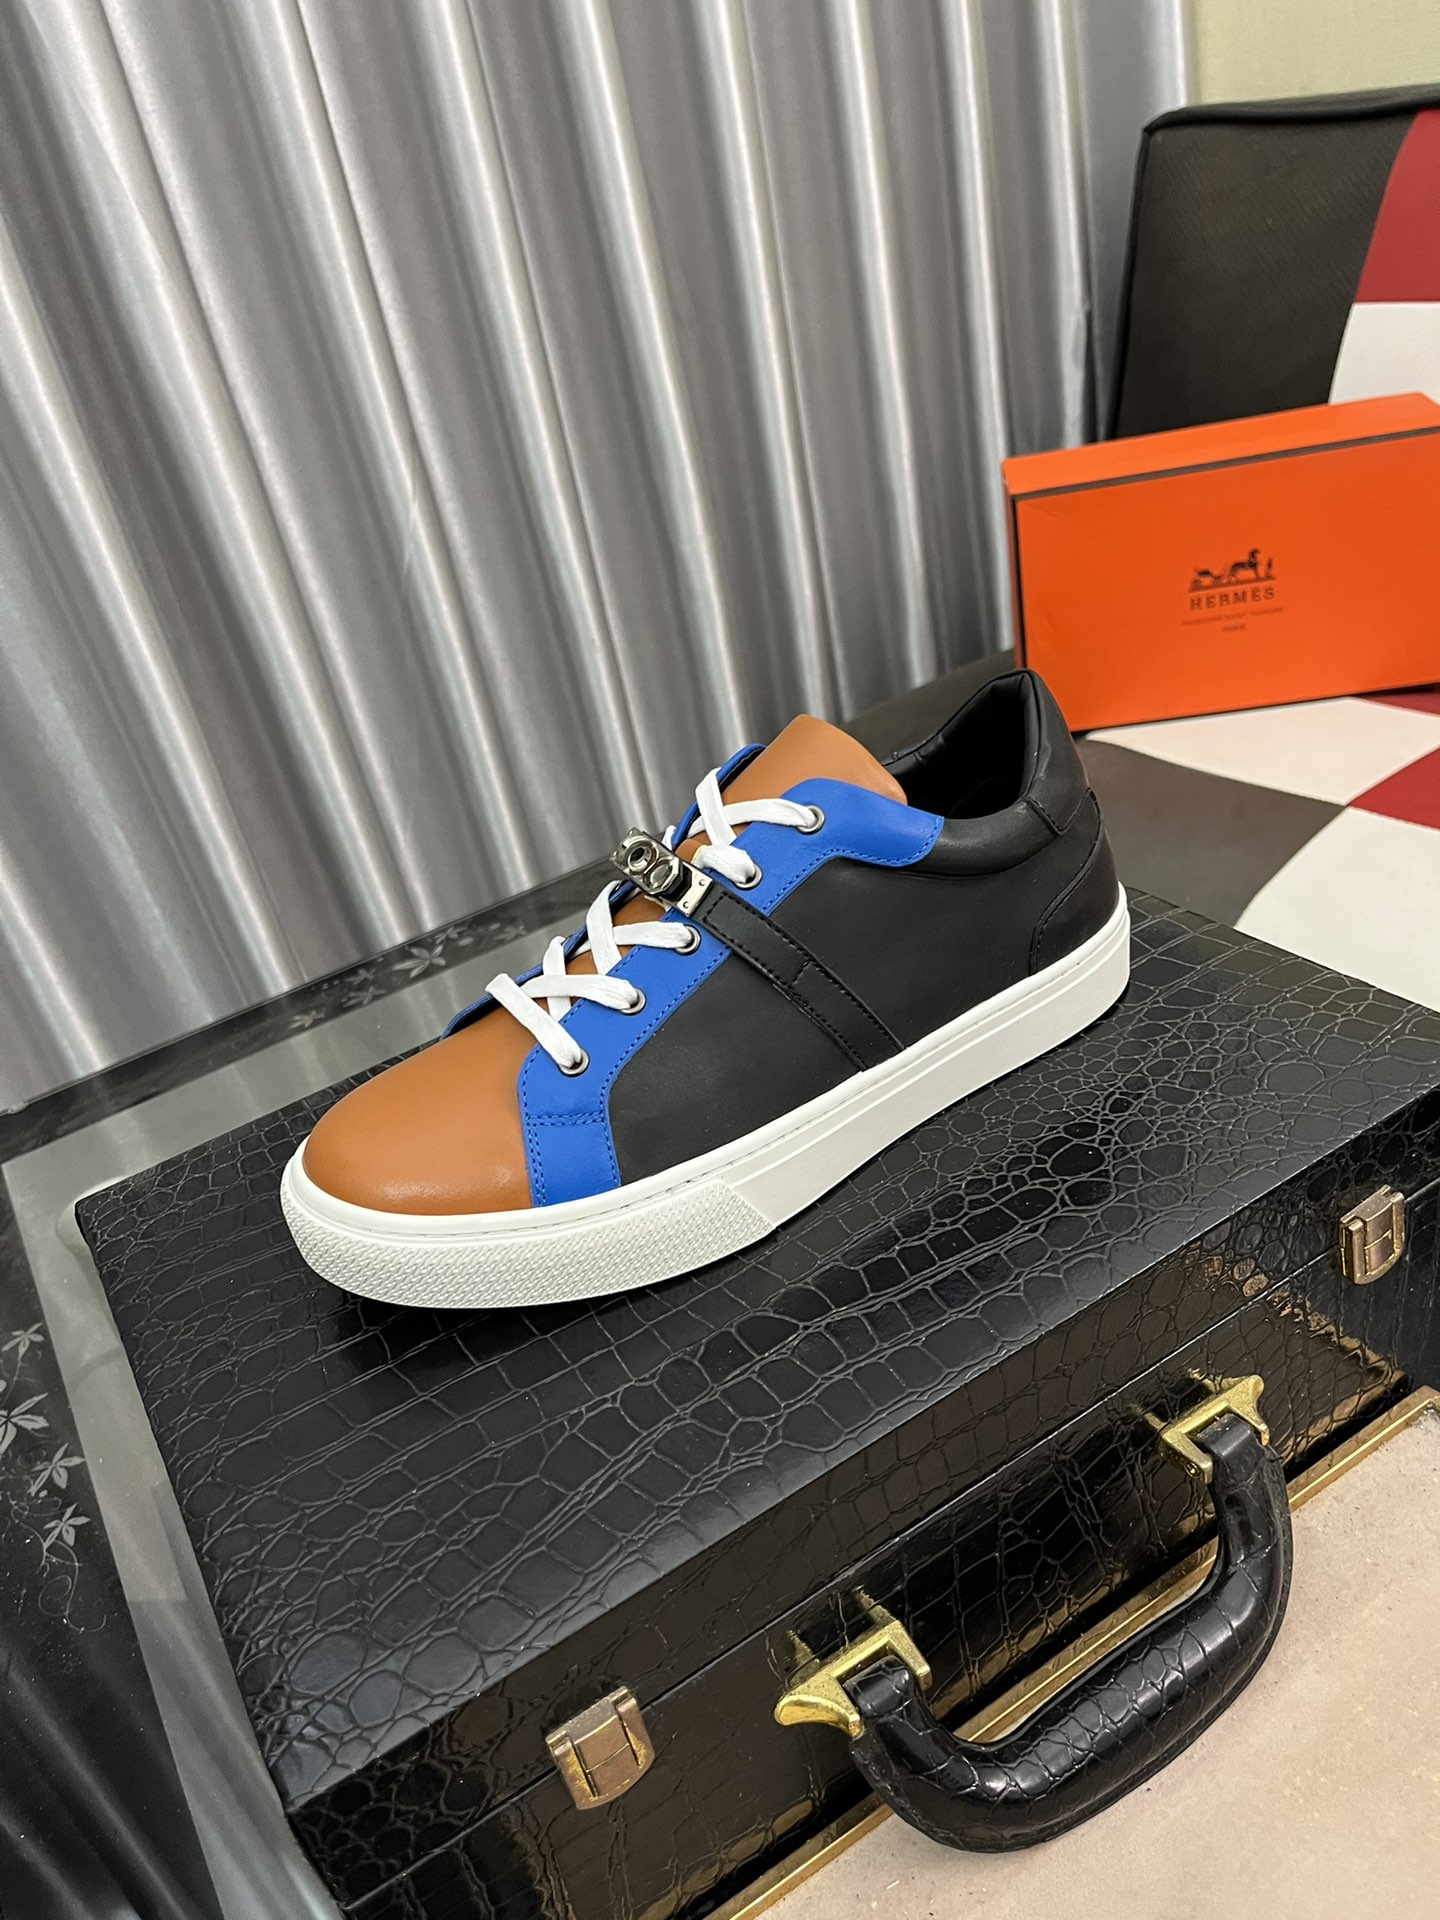 Hermes Shoes Sneakers Buy best quality Replica
 Splicing Men Cowhide Fashion Casual